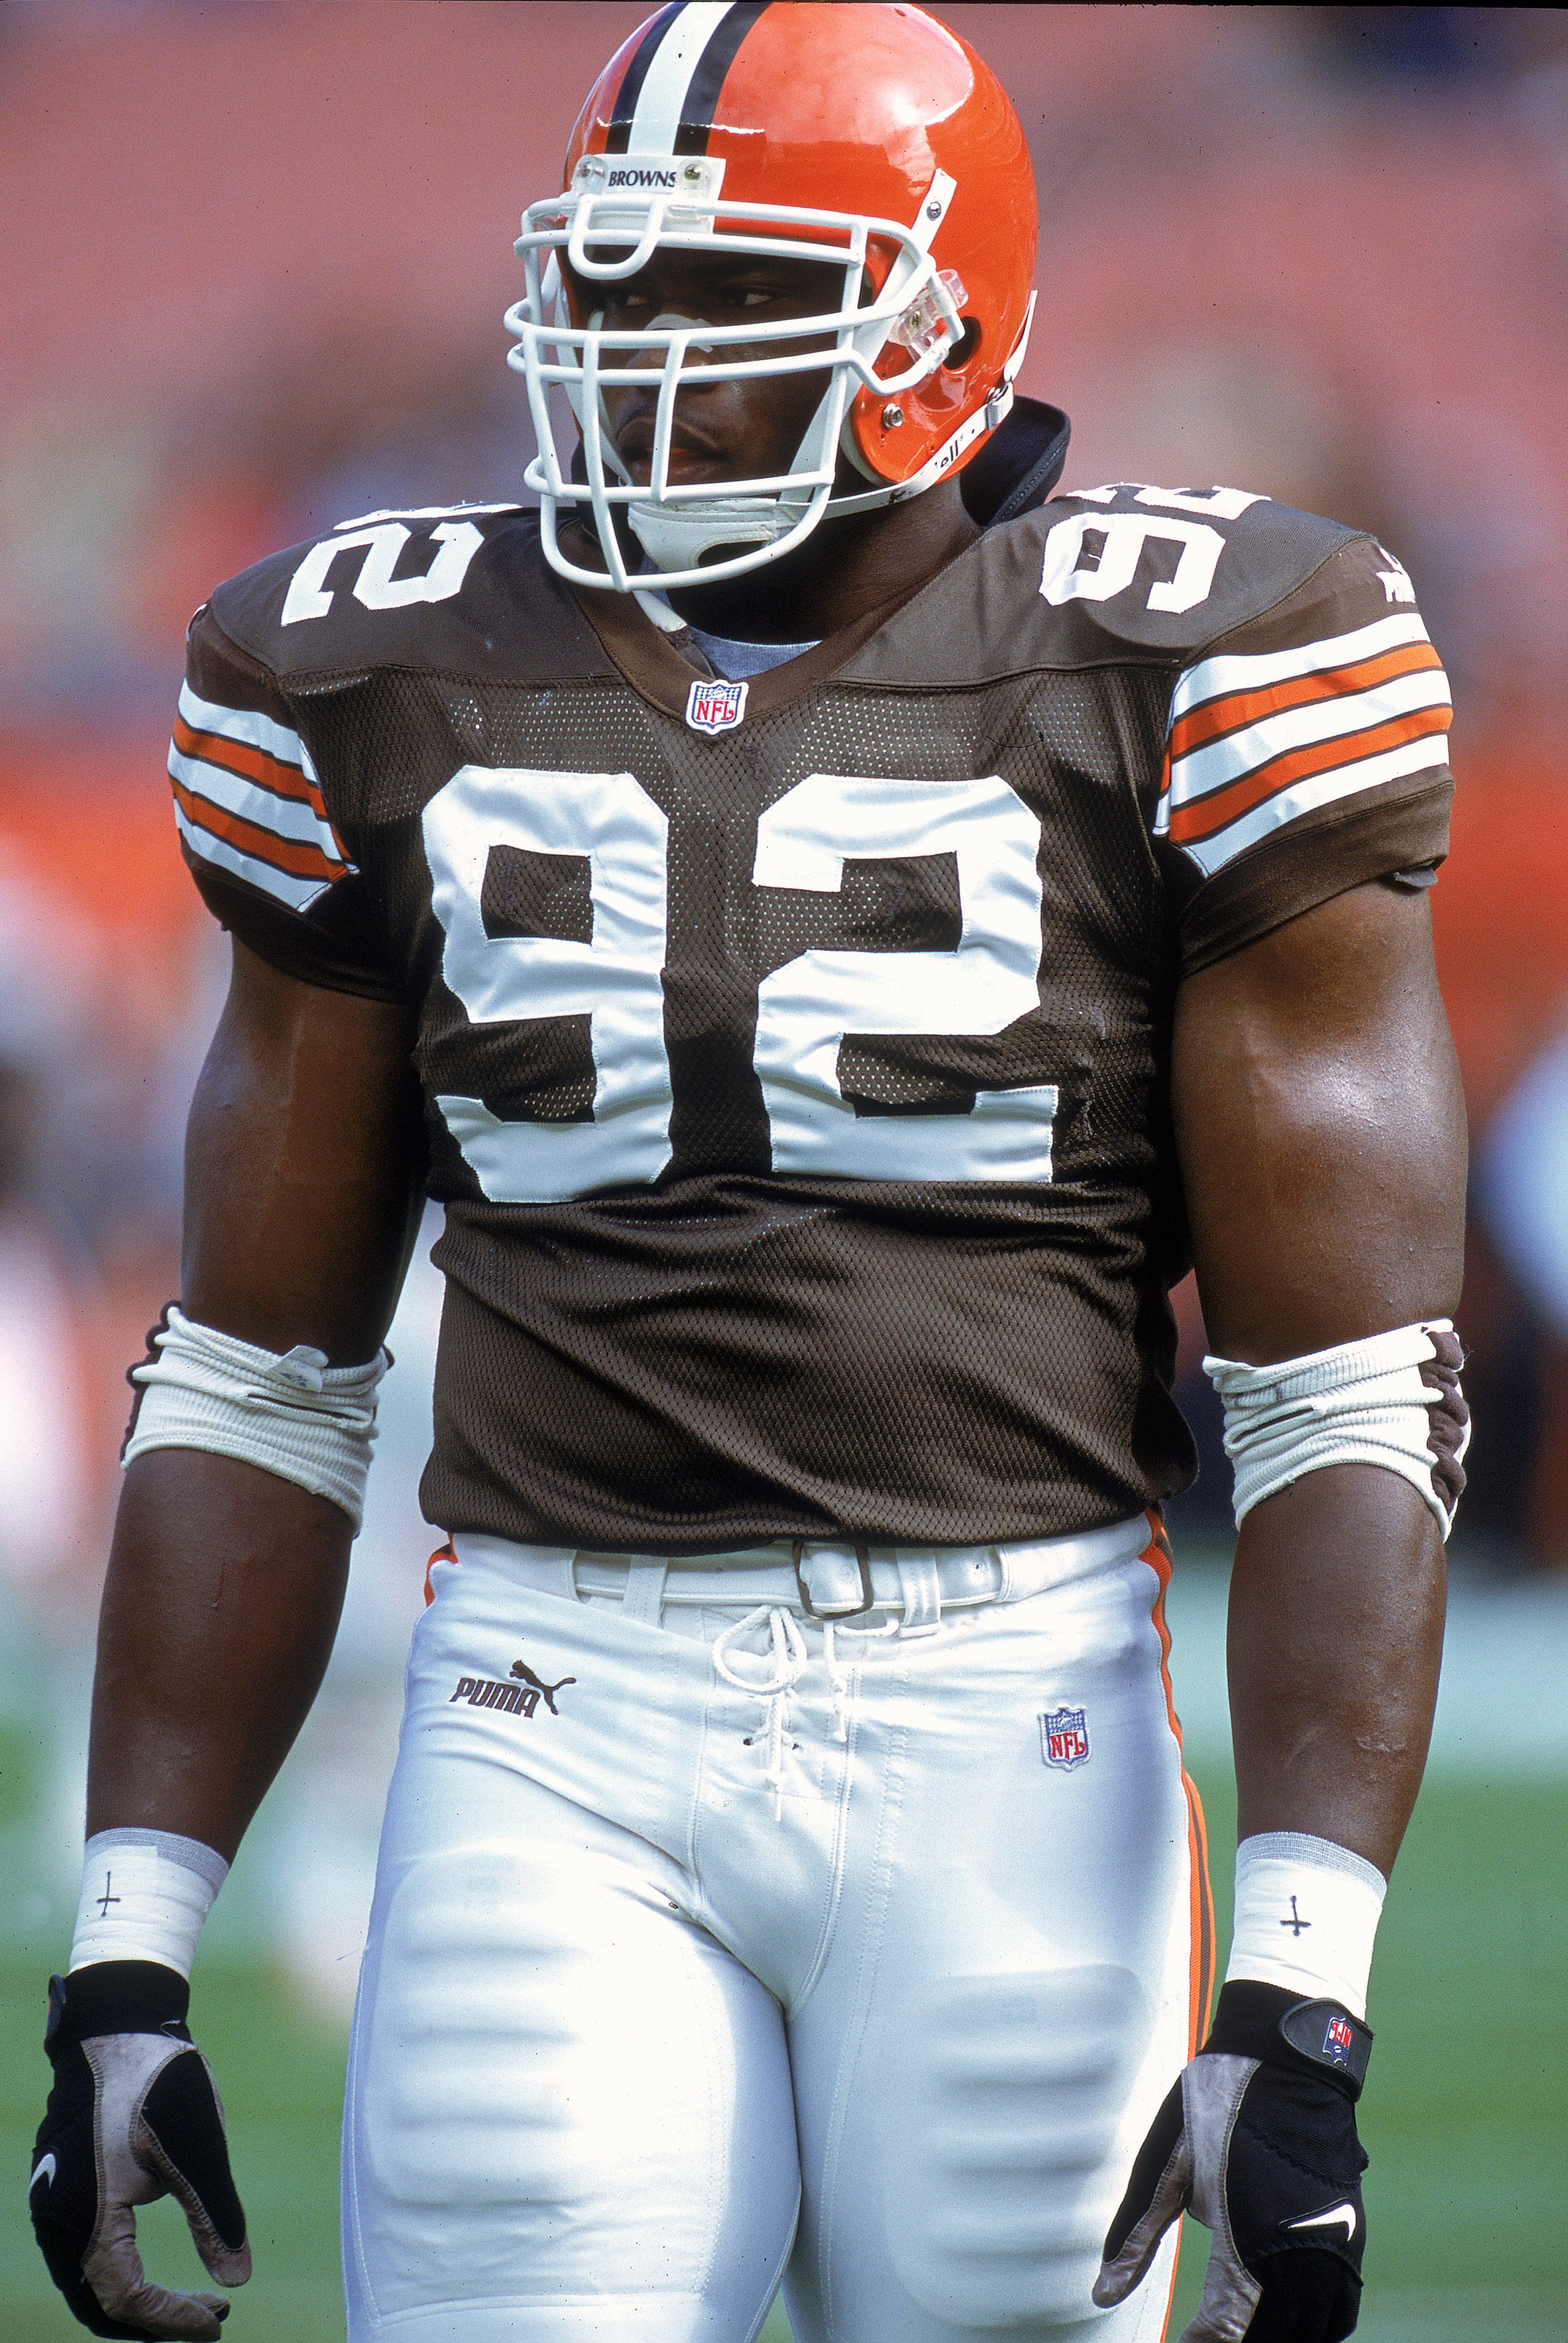 29 Oct 2000: Courtney Brown #92 of the Cleveland Browns walks on the field during a game against the Cincinnati Bengals at Browns Stadium in Cleveland, Ohio. The Bengals defeated the Browns 12-3.Mandatory Credit: Jonathan Daniel  /Allsport